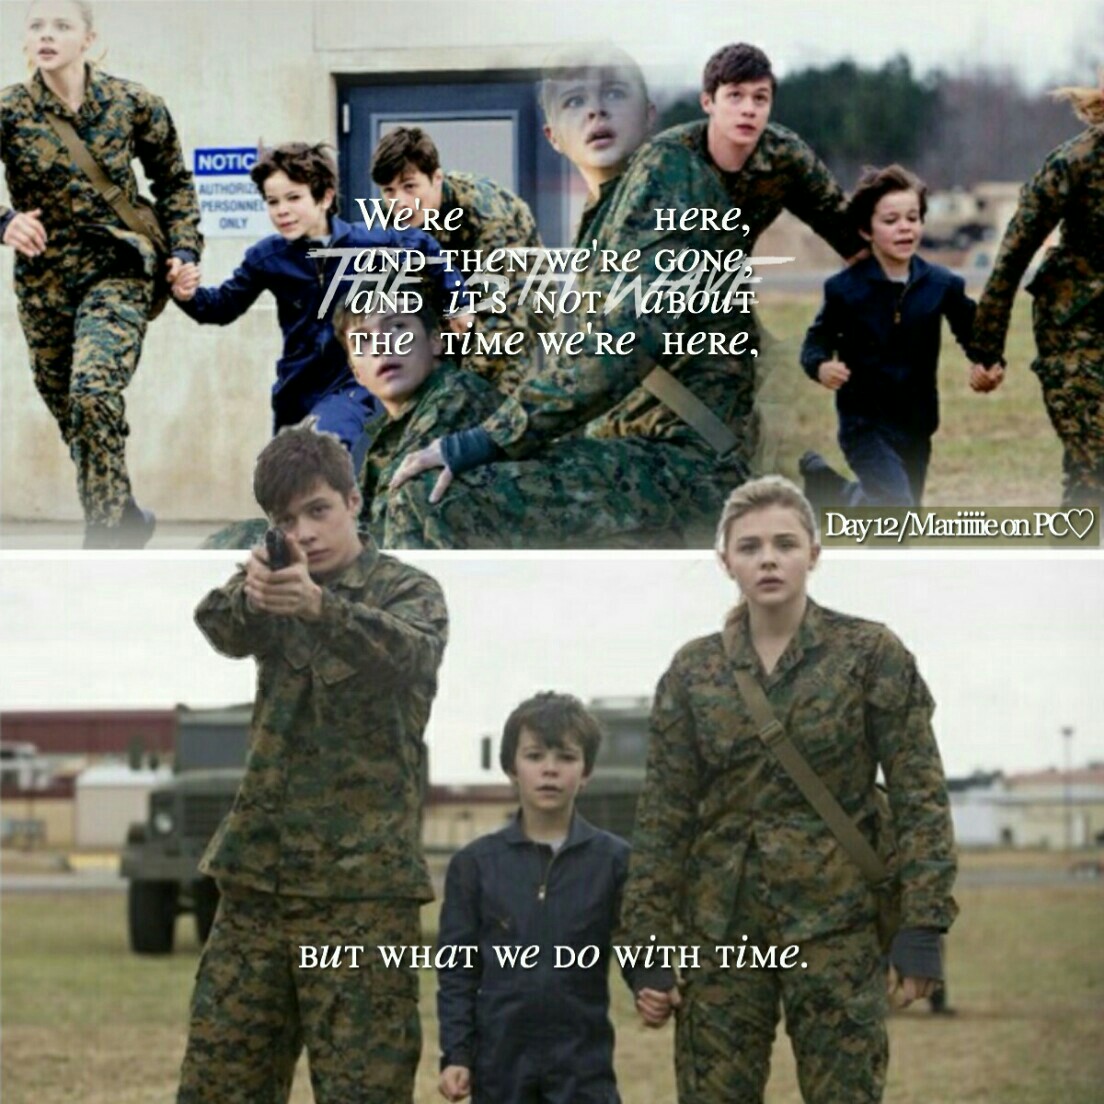 🌙- T A P -🌙

12.12.17 🎄

Day 12 - The 5th Wave🌊

QOTD - Ben or Evan?

AOTD - Duh, Ben of course.😂😂😍😍

👑 🌙 👑 🌙 👑